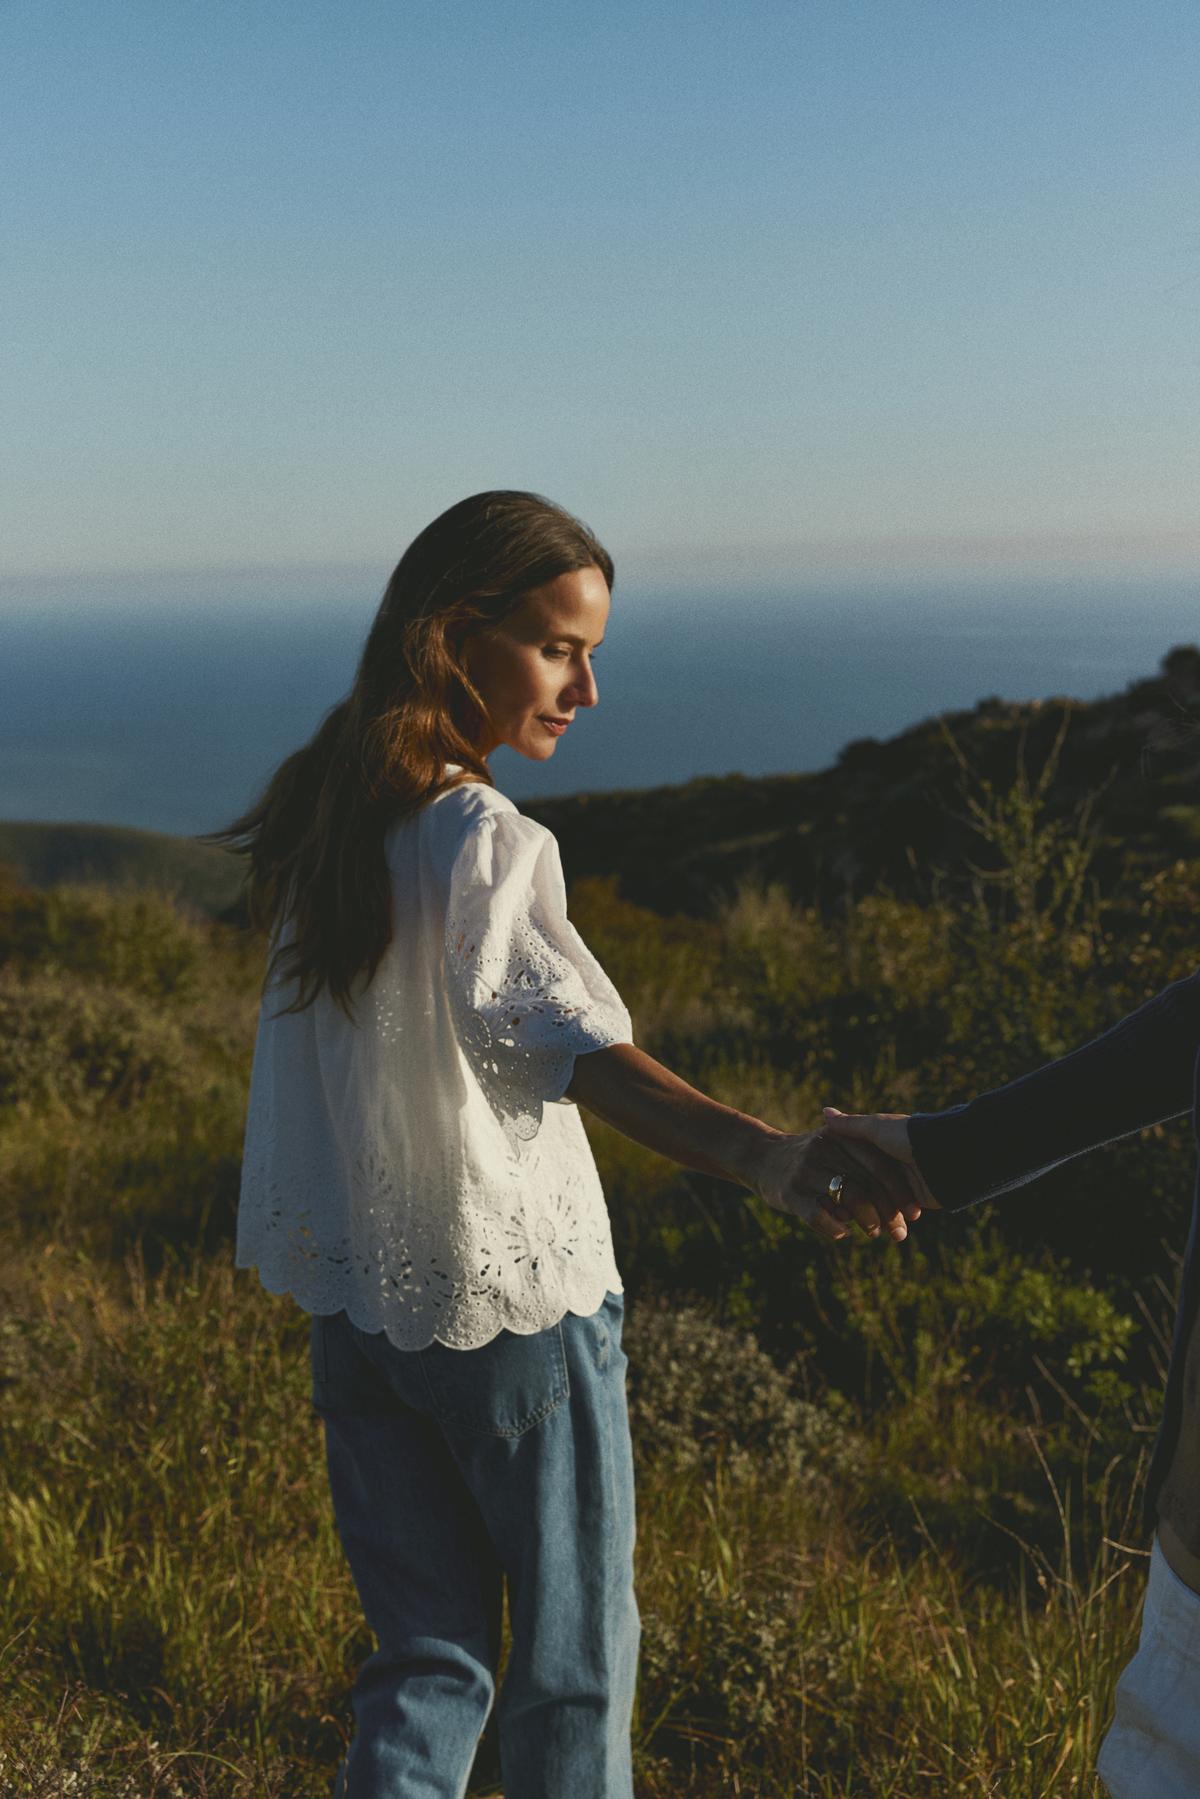 A woman in a RAZI EMBROIDERED COTTON LACE TOP by Velvet by Graham & Spencer, and blue jeans holding hands with someone off-camera, standing in a sunny, grassy hillside landscape.-36443805712577